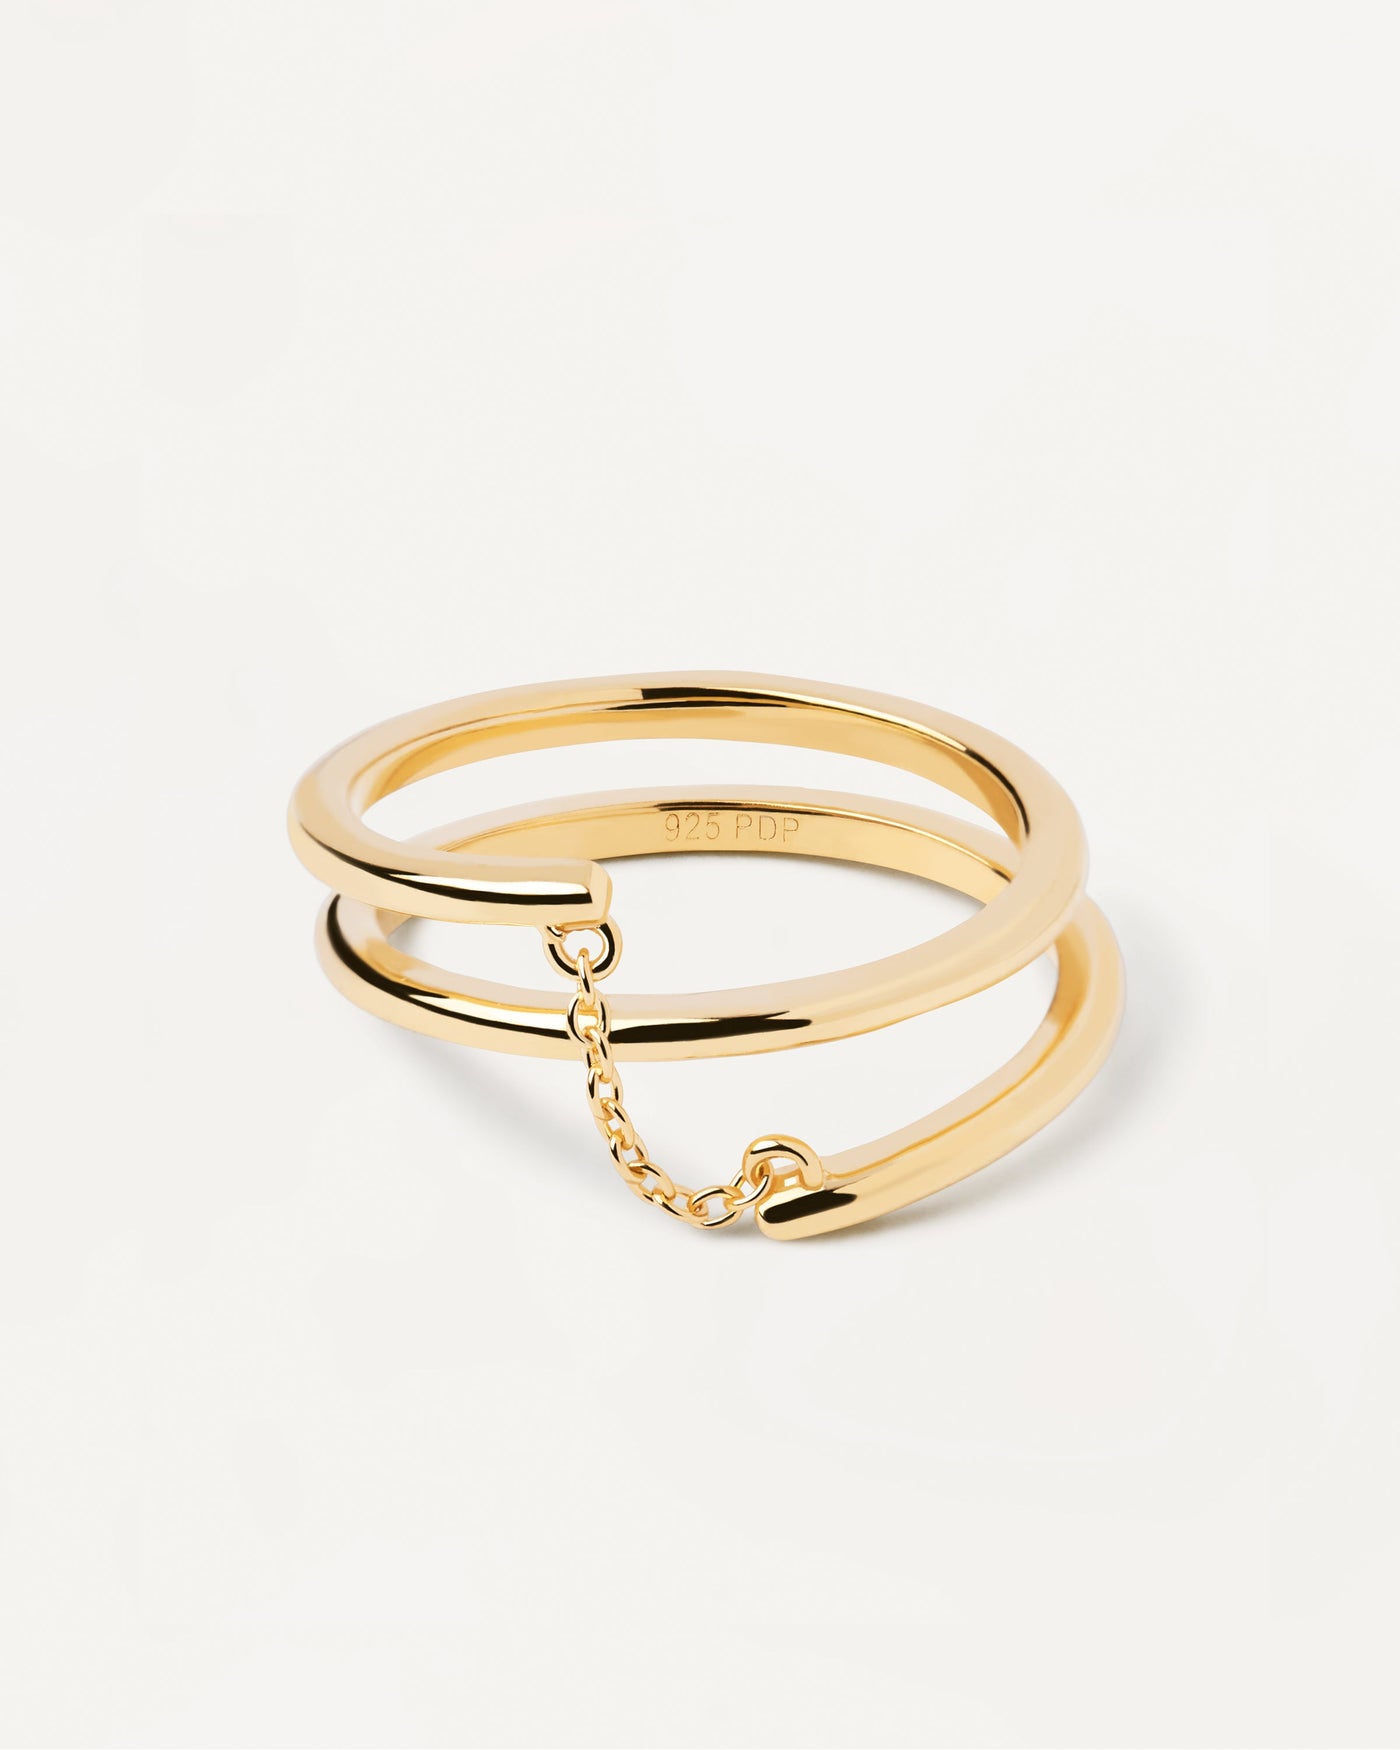 2023 Selection | Giro Ring. Gold-plated silver ring with dainty chain in spiral shape. Get the latest arrival from PDPAOLA. Place your order safely and get this Best Seller. Free Shipping.